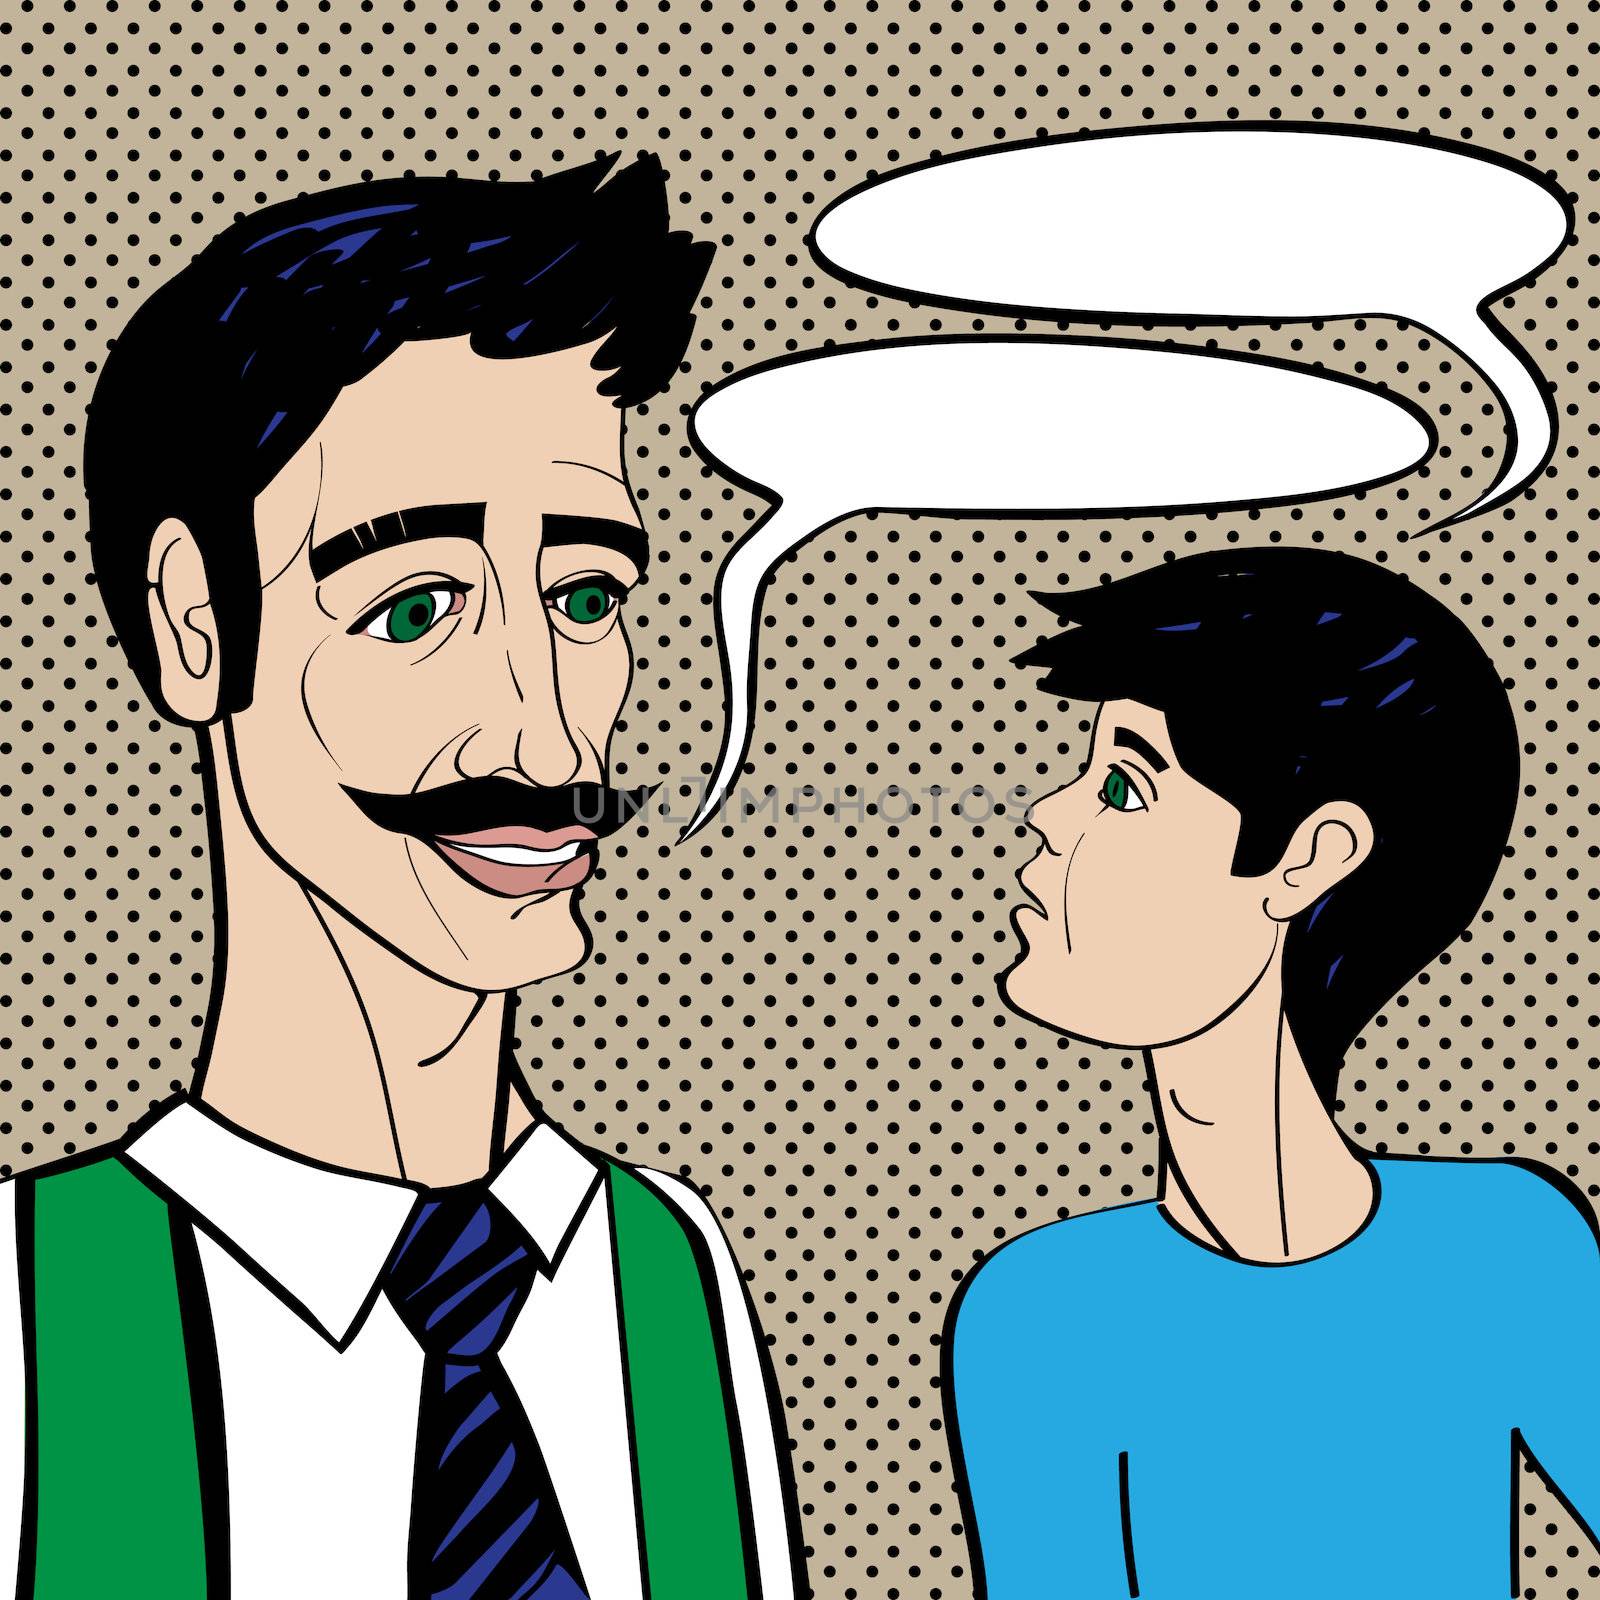 Pop art cartoons style illustration of a father and son conversation over a background with dots